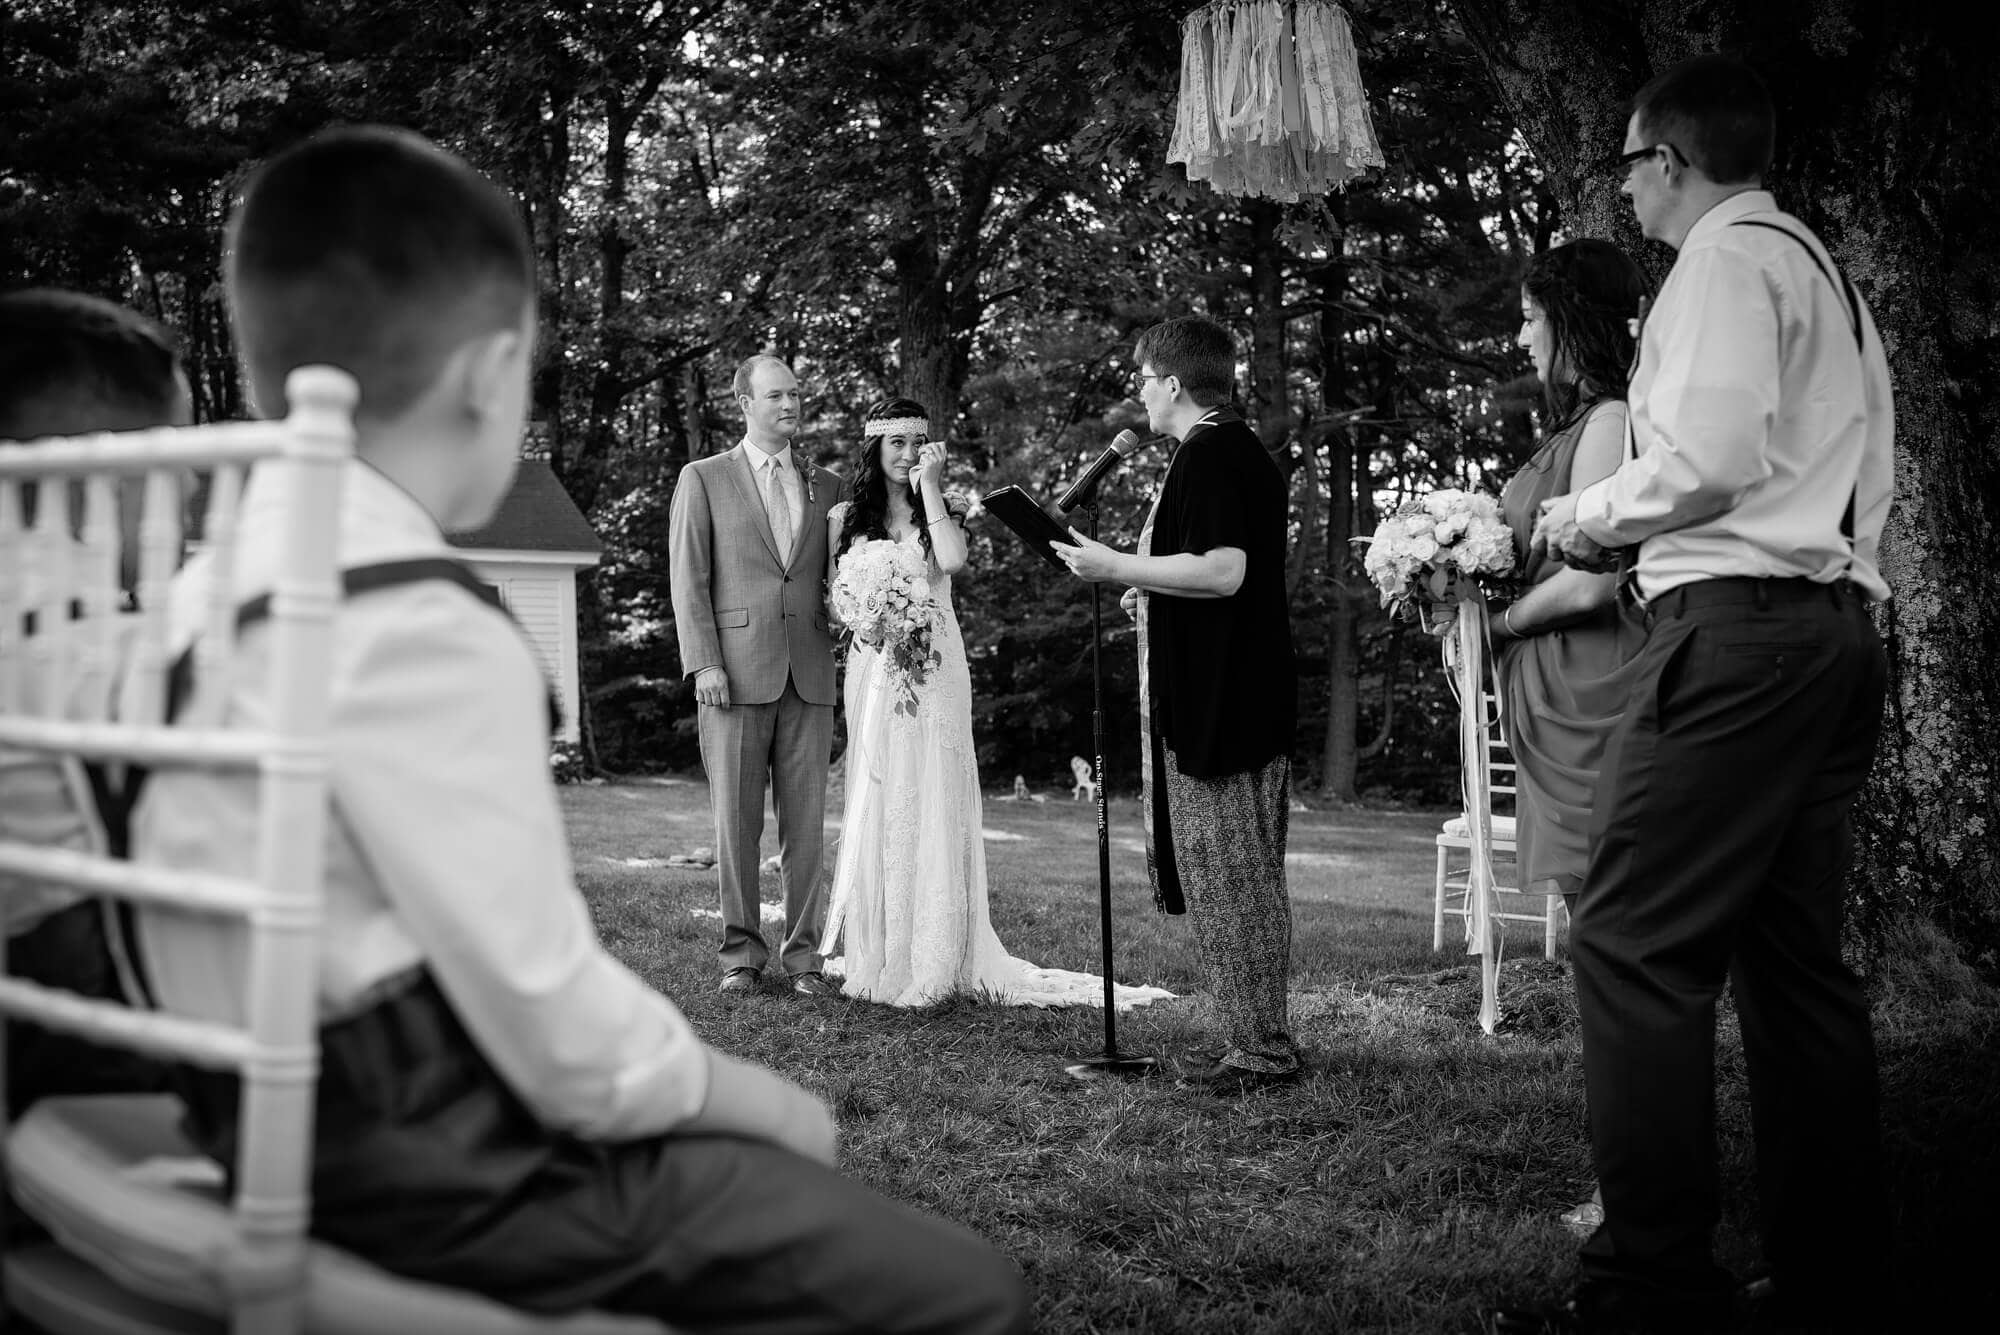 tearful moment at outdoor wedding ceremony in berkshires